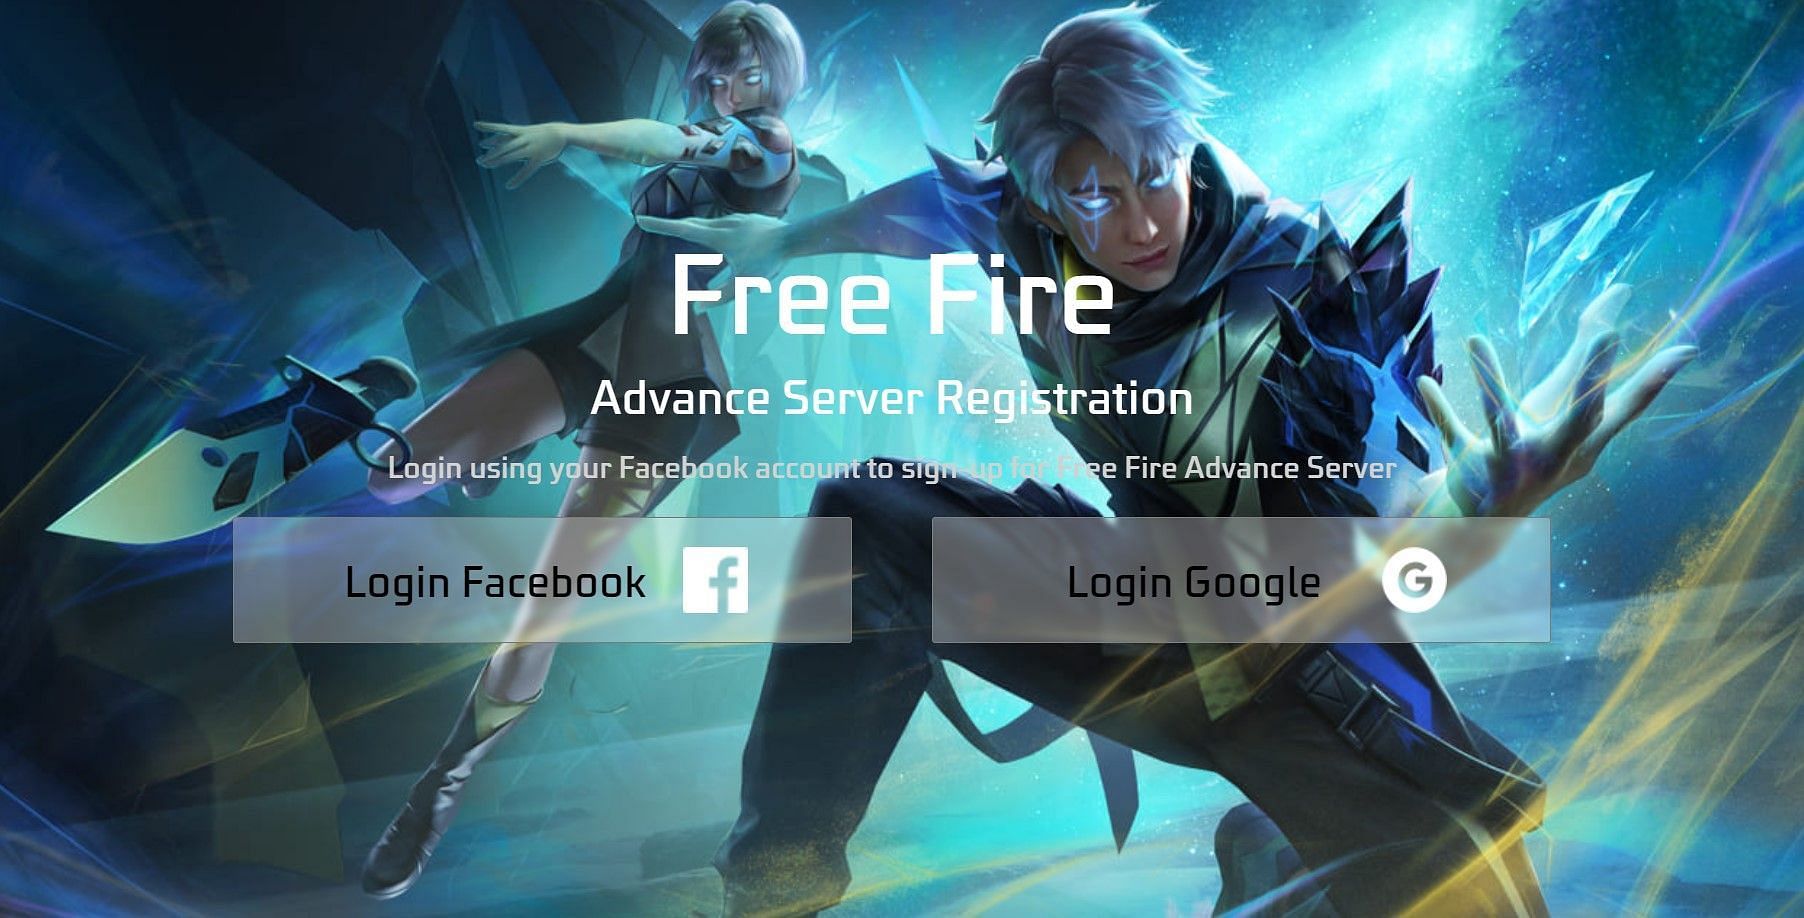 Refer to the steps below to complete the download for the Advance Server (Image via Garena)